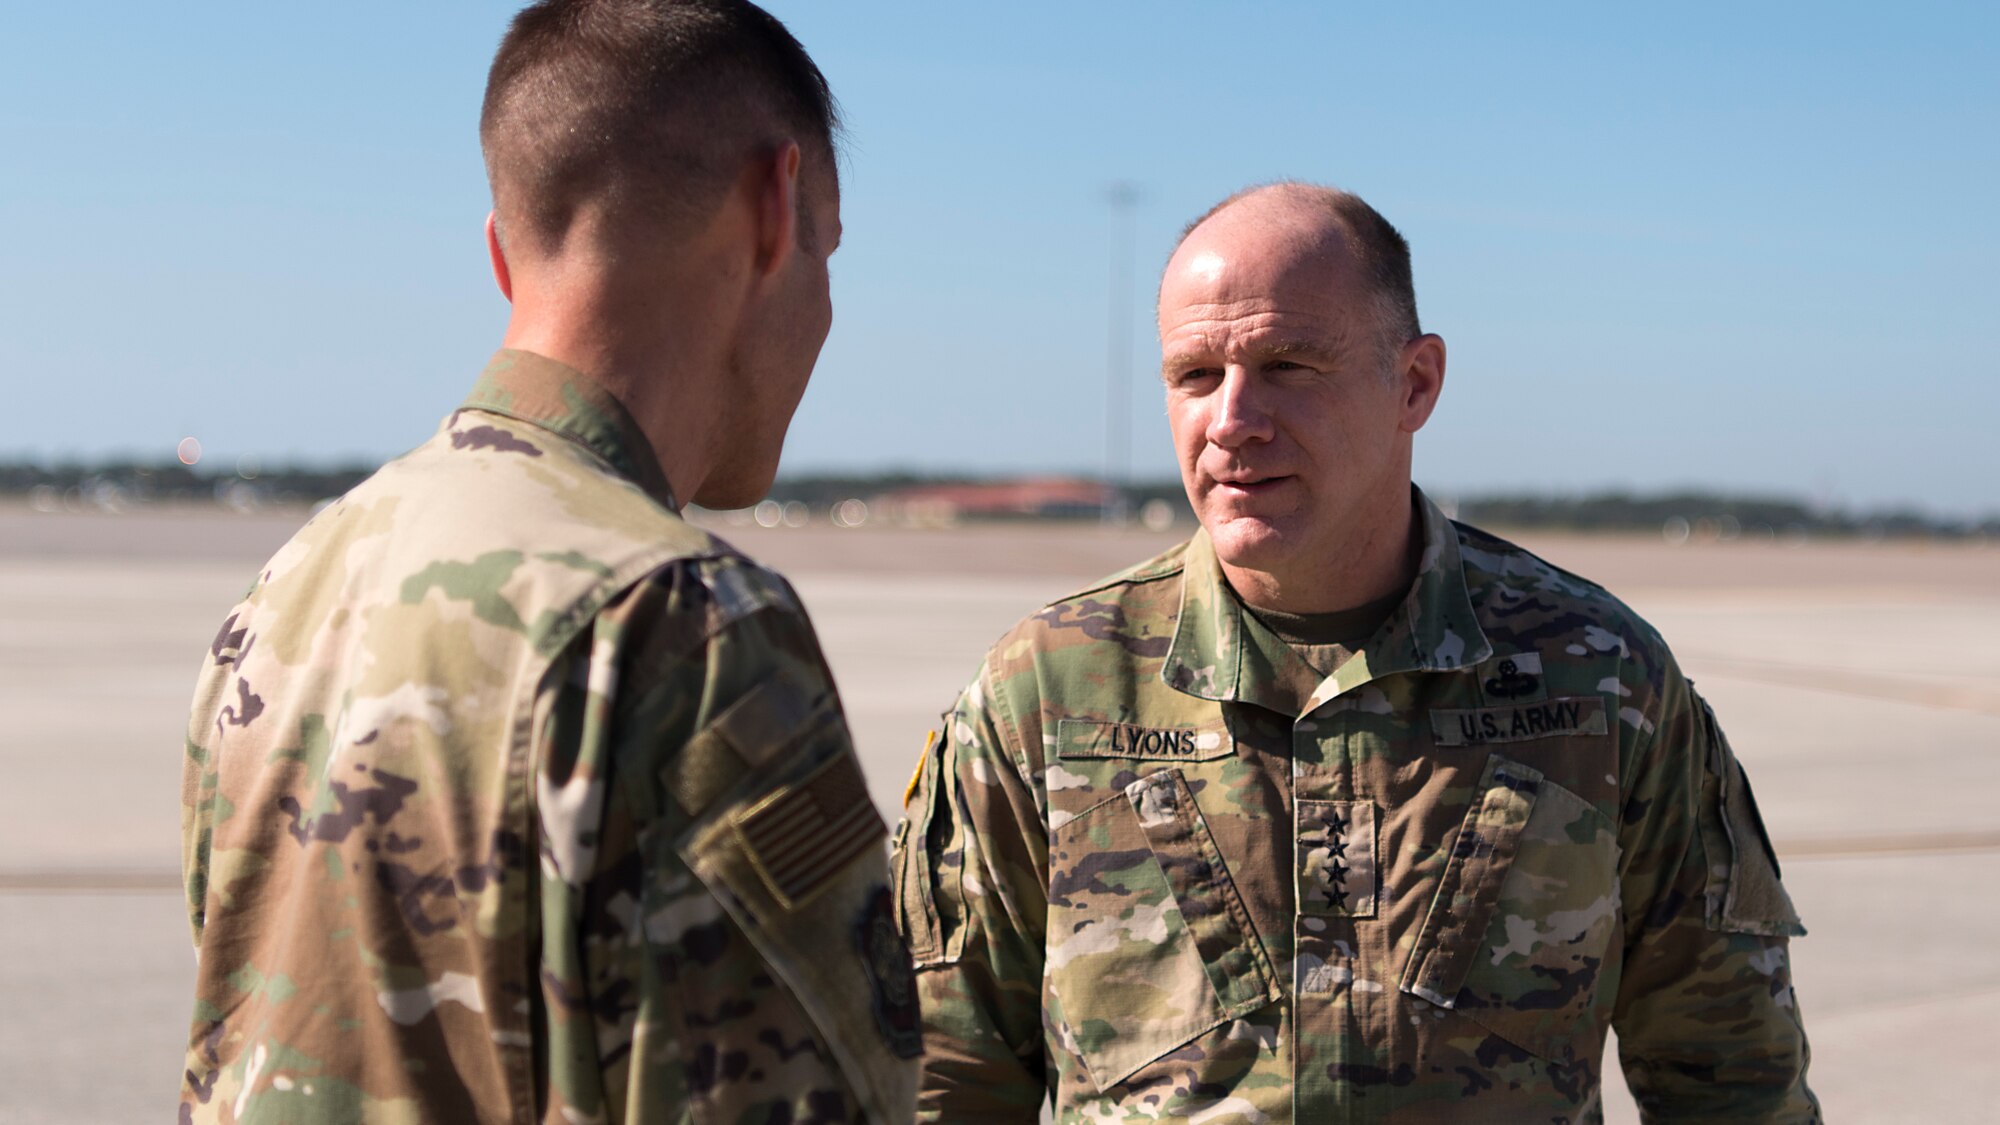 U.S. Army Gen. Stephen Lyons, U.S. Transportation Command commander, speaks with U.S. Air Force Col. Stephen Snelson, 6th Air Mobility Wing commander, during his visit to MacDill Air Force Base, Fla., Feb. 8, 2019. As the USTRANSCOM commander, Lyons visited MacDill to learn more about how the KC-135 Stratotanker enables force projection and sustained military power whenever and wherever needed. USTRANSCOM is a unified, functional combatant command that provides support to the nine other U.S. combatant commands, the military services, defense agencies and other government organizations.